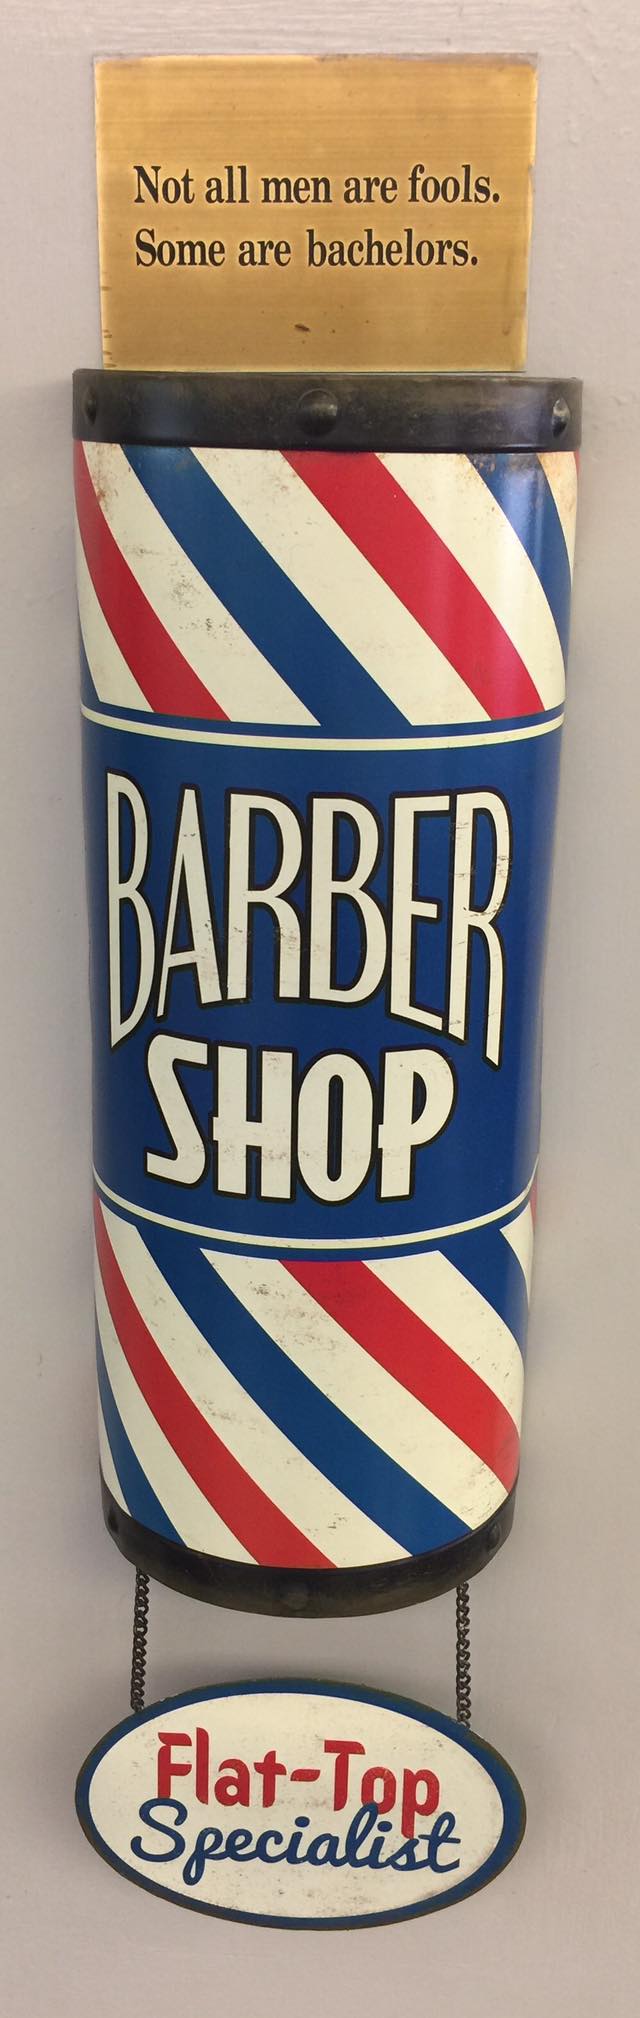 Mario’s (formerly Roger’s) Westbrook Barber Shop 1266 Boston Post Rd, Westbrook Connecticut 06498